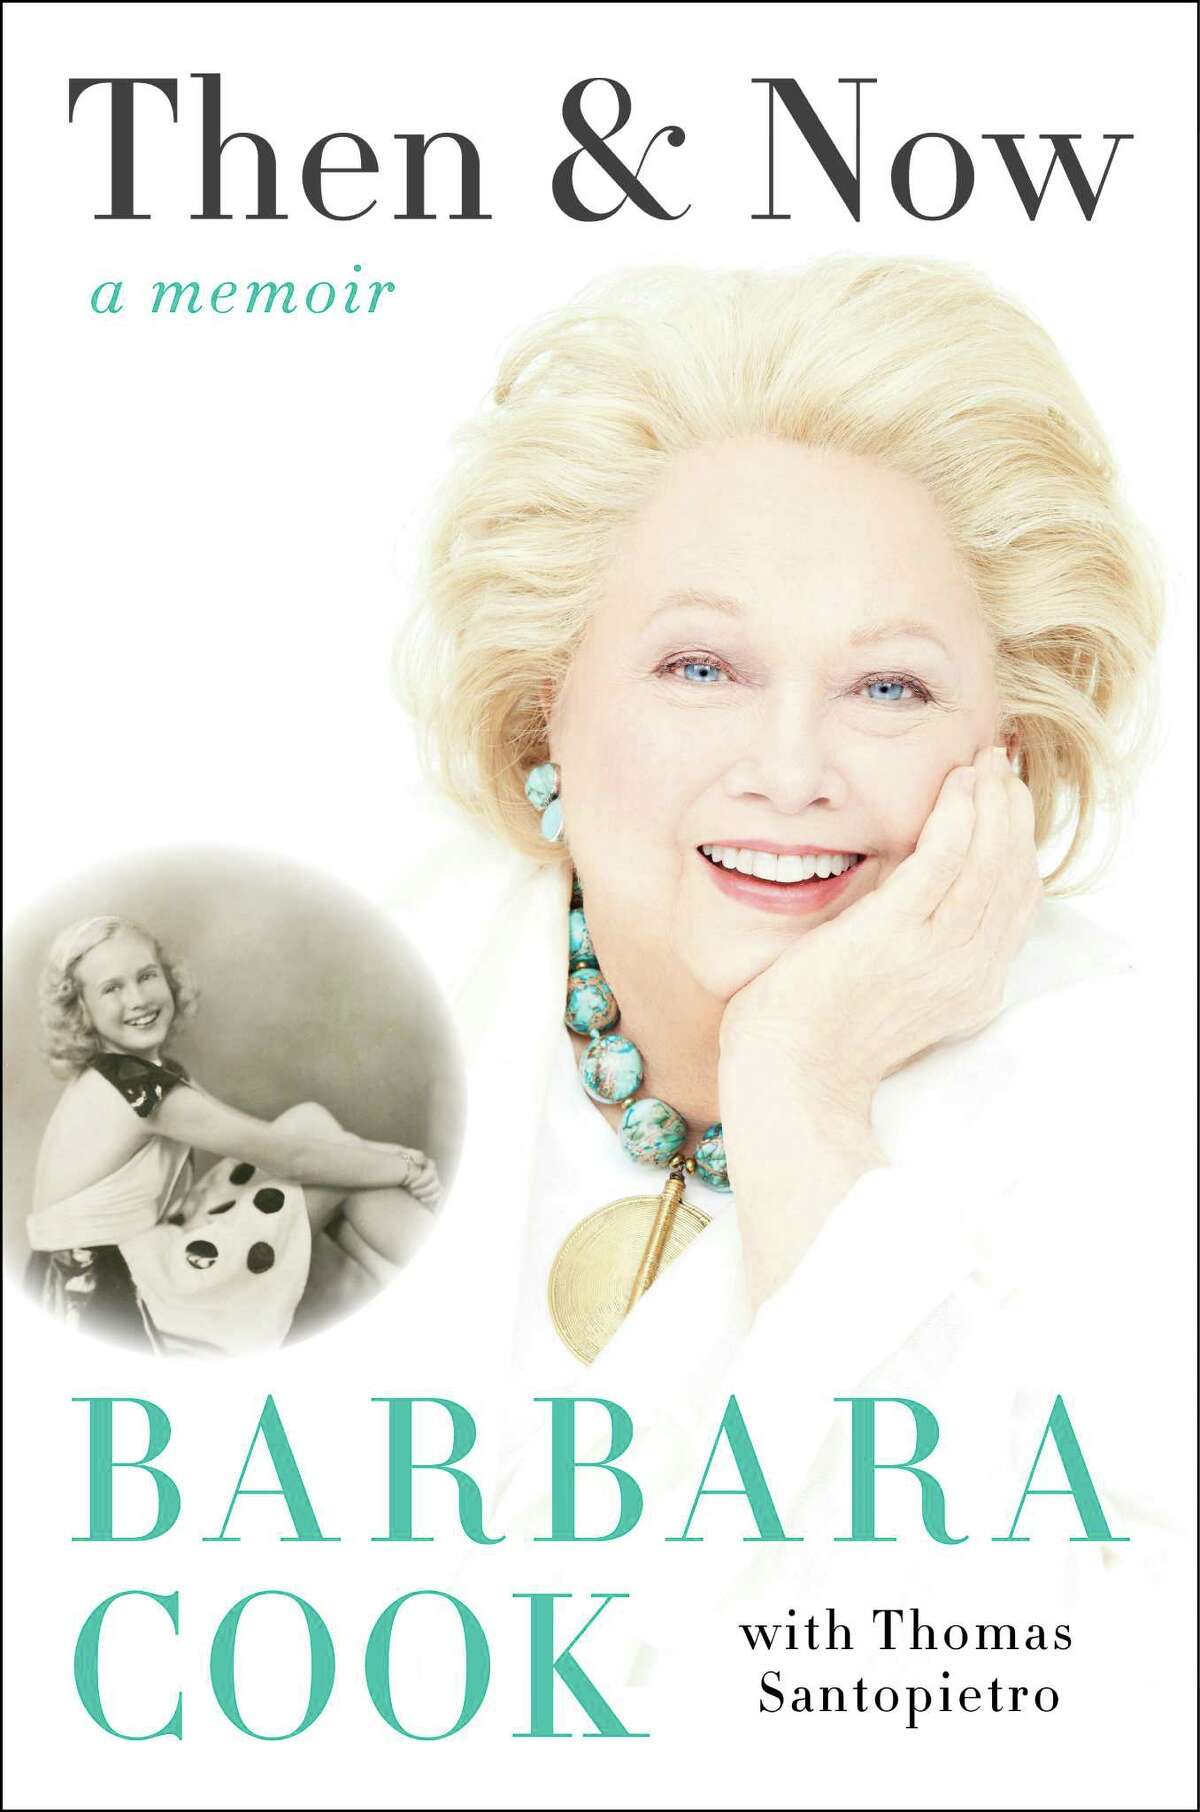 In this book cover image released by Harper shows, "Then & Now," a memoir by Barbara Cook, with Thomas Santopietro. (Harper via AP) ORG XMIT: NYET306